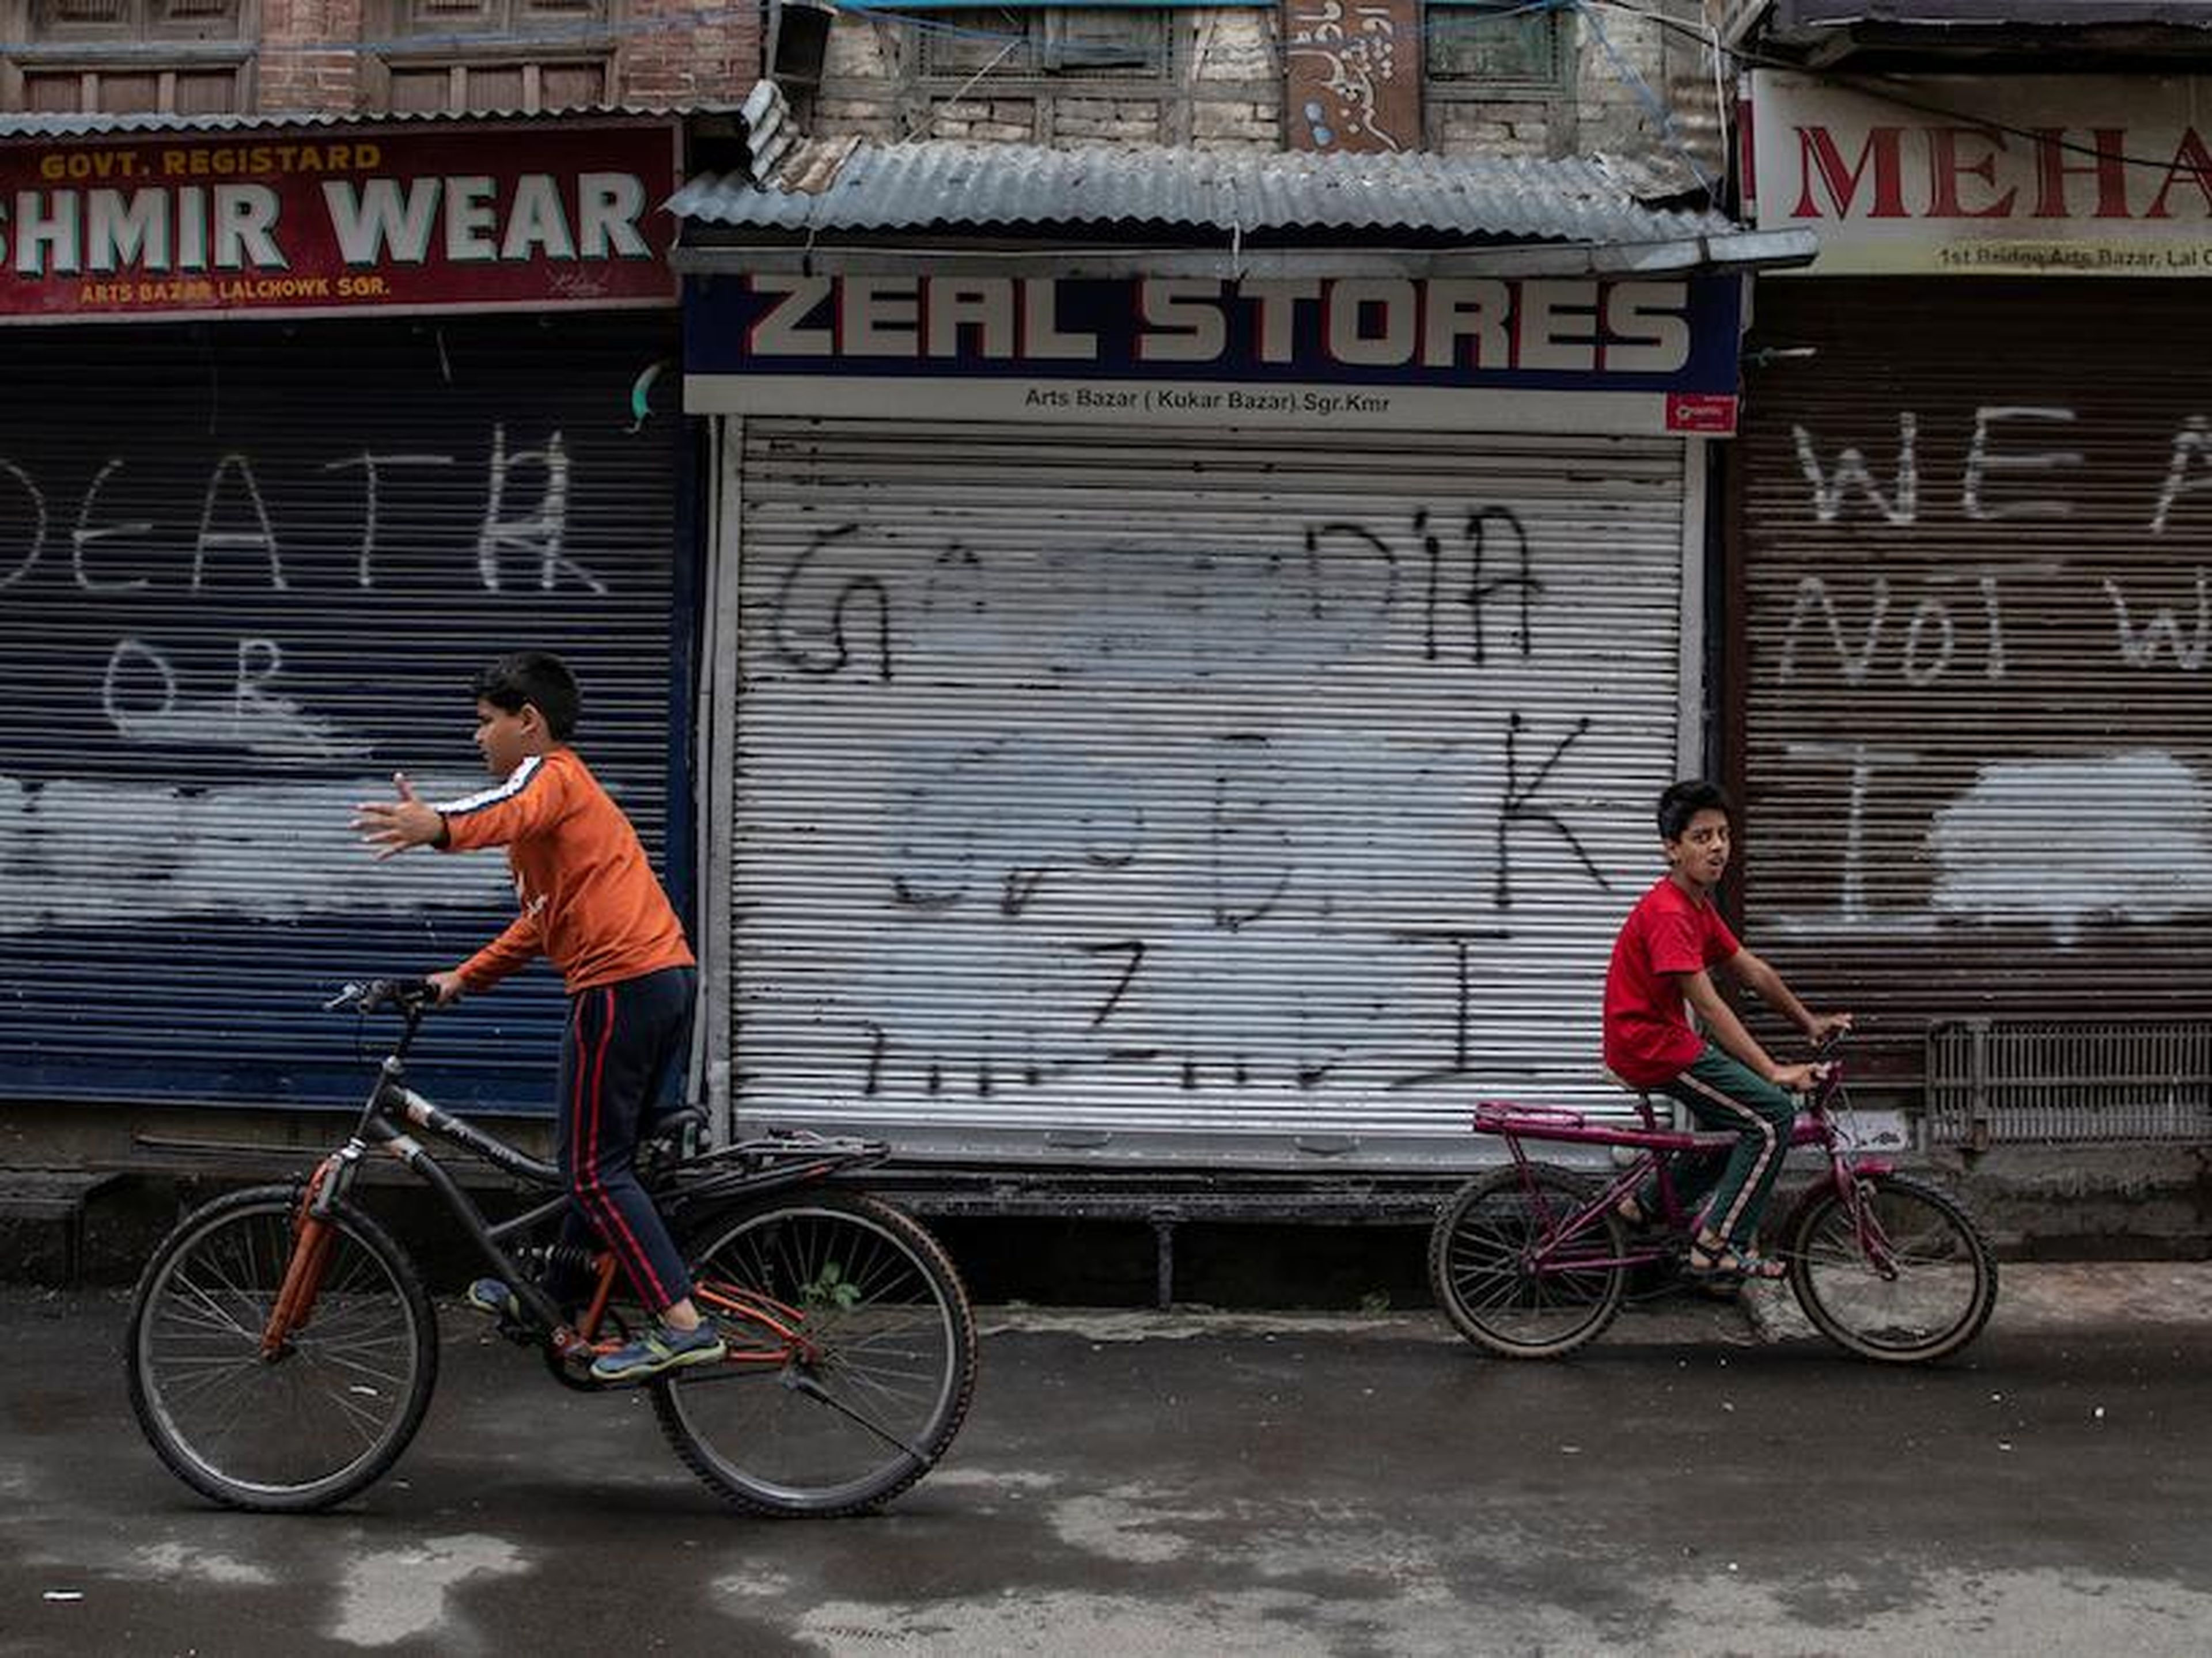 Kashmiri boys cycle in an empty street during restrictions in Srinagar, Jammu and Kashmir state, in August 2019.